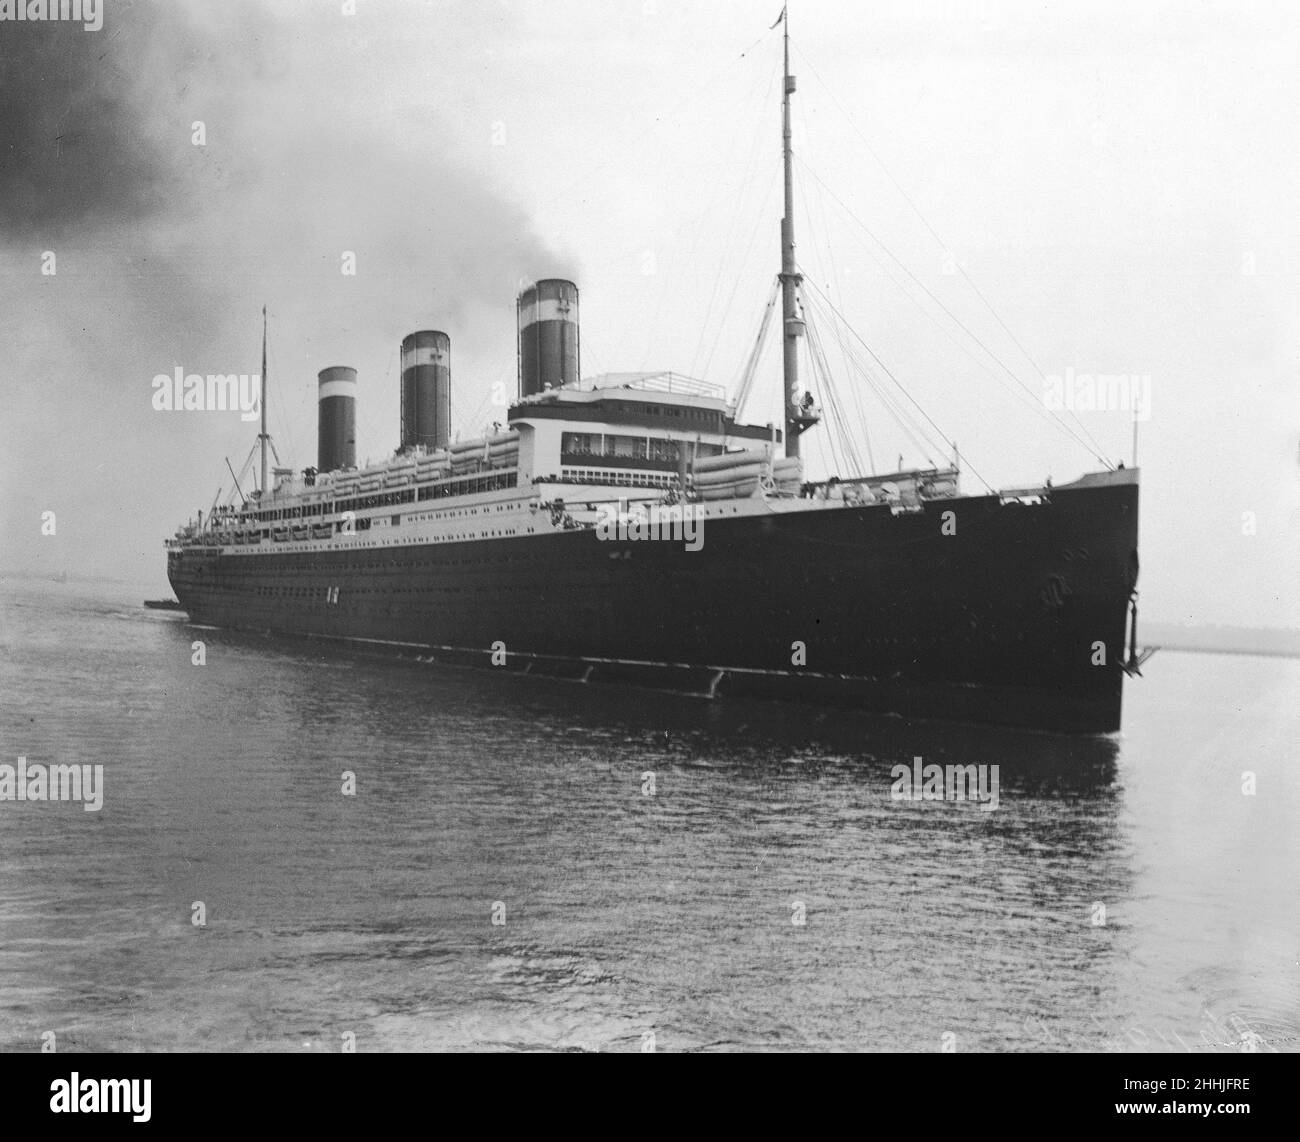 The United States line ship SS Leviathan, formerly known as the ...